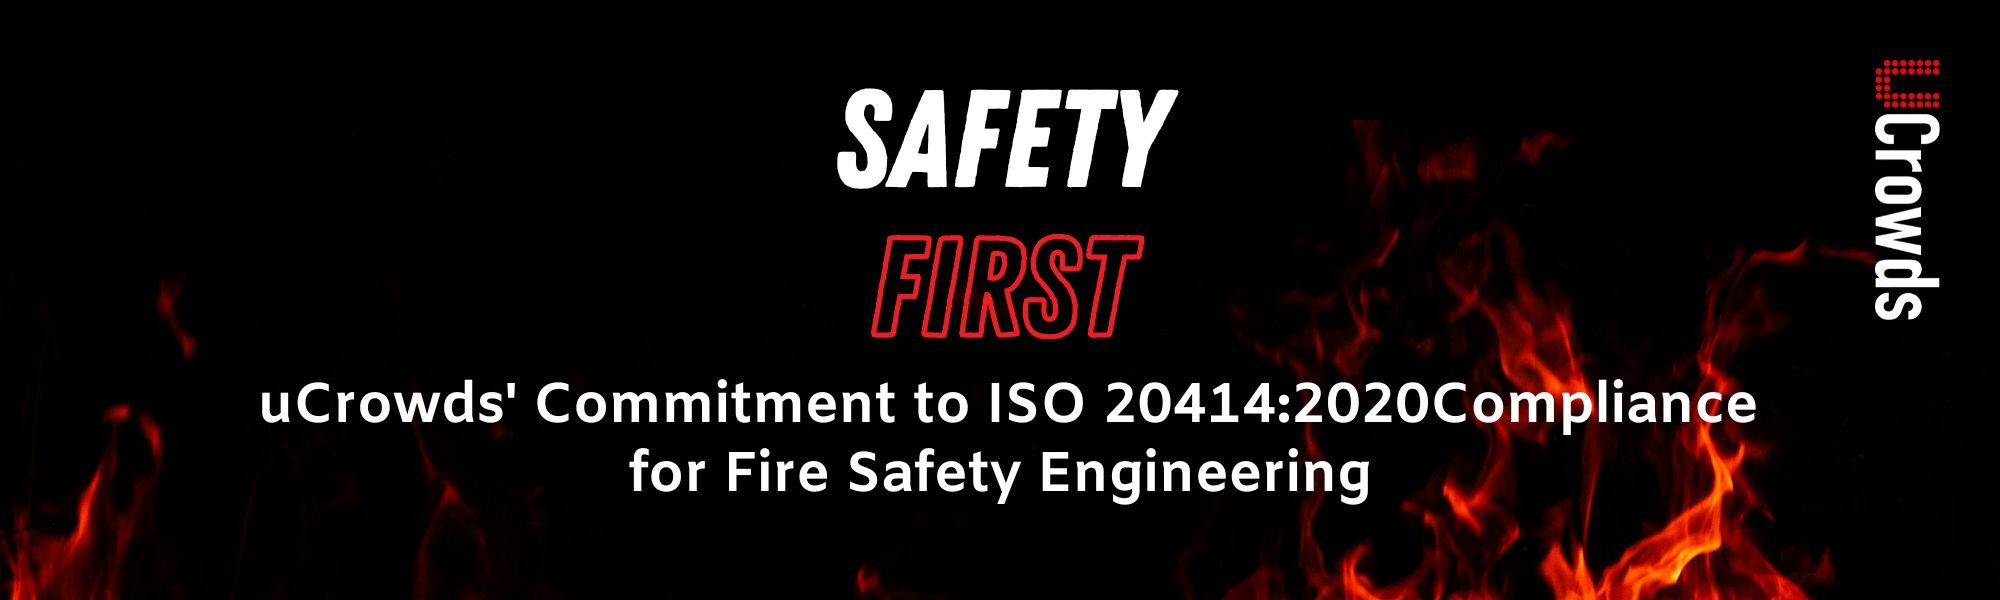 Safety First: uCrowds' Commitment to ISO 20414:2020 Compliance for Fire Safety Engineering image